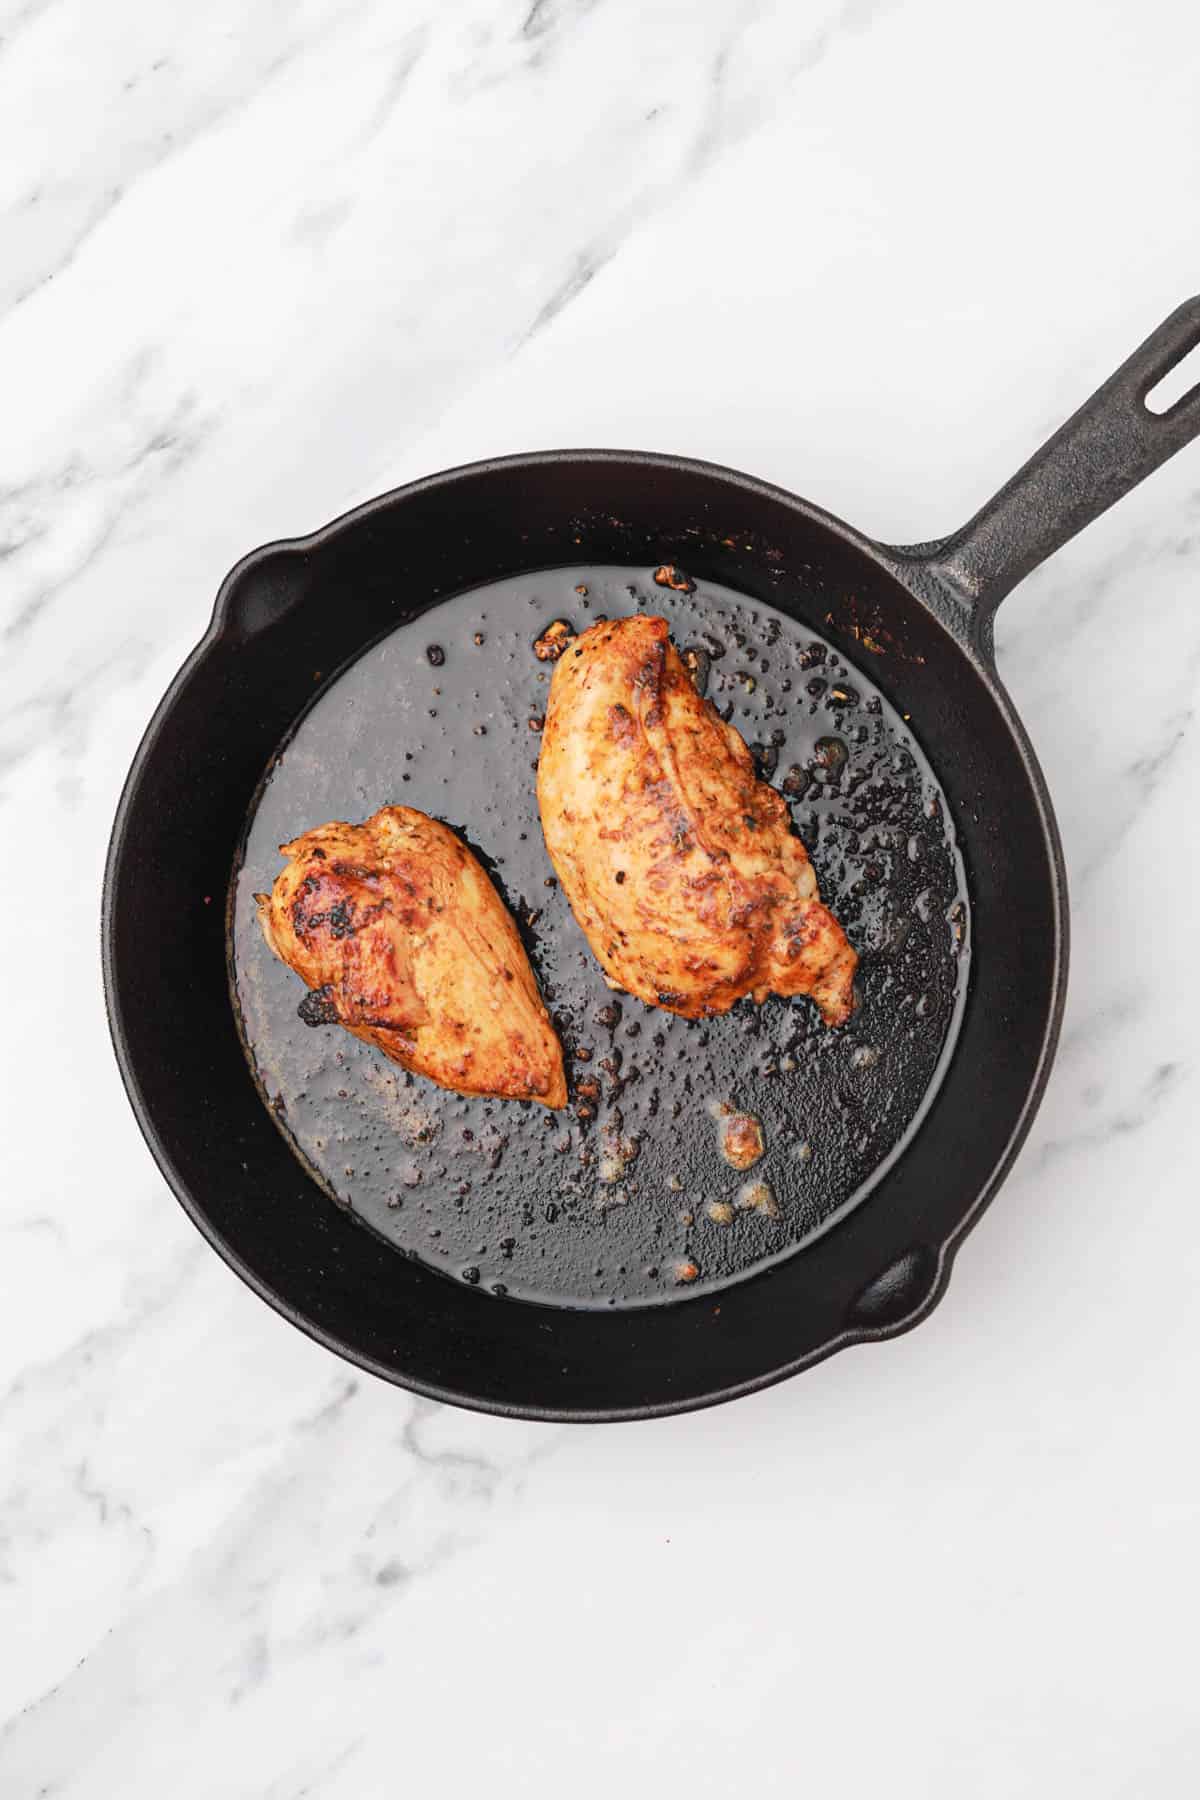 pan cooked chicken breast in a skillet.